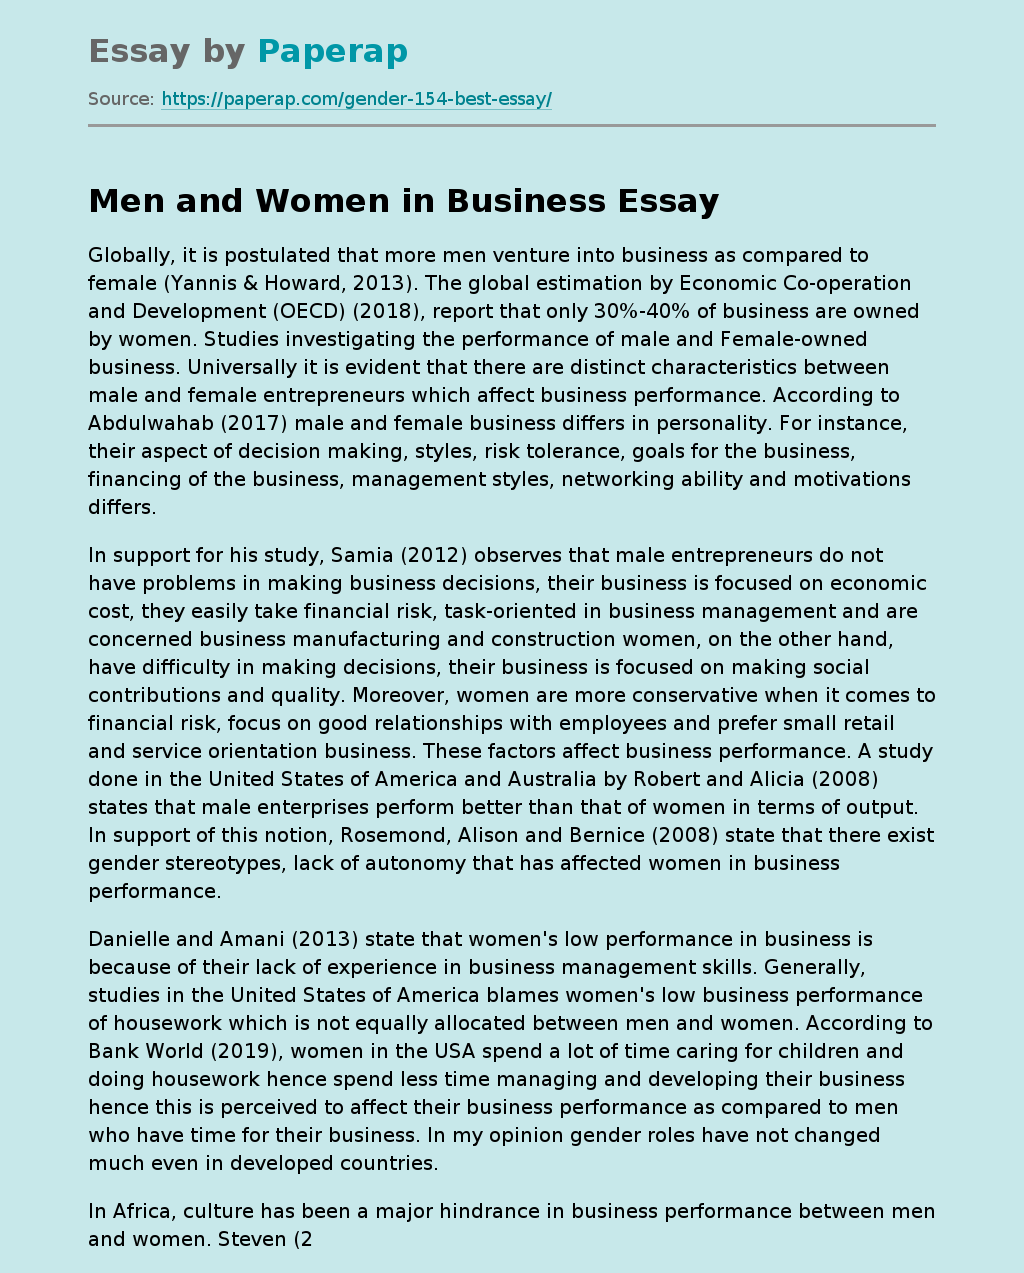 Men and Women in Business